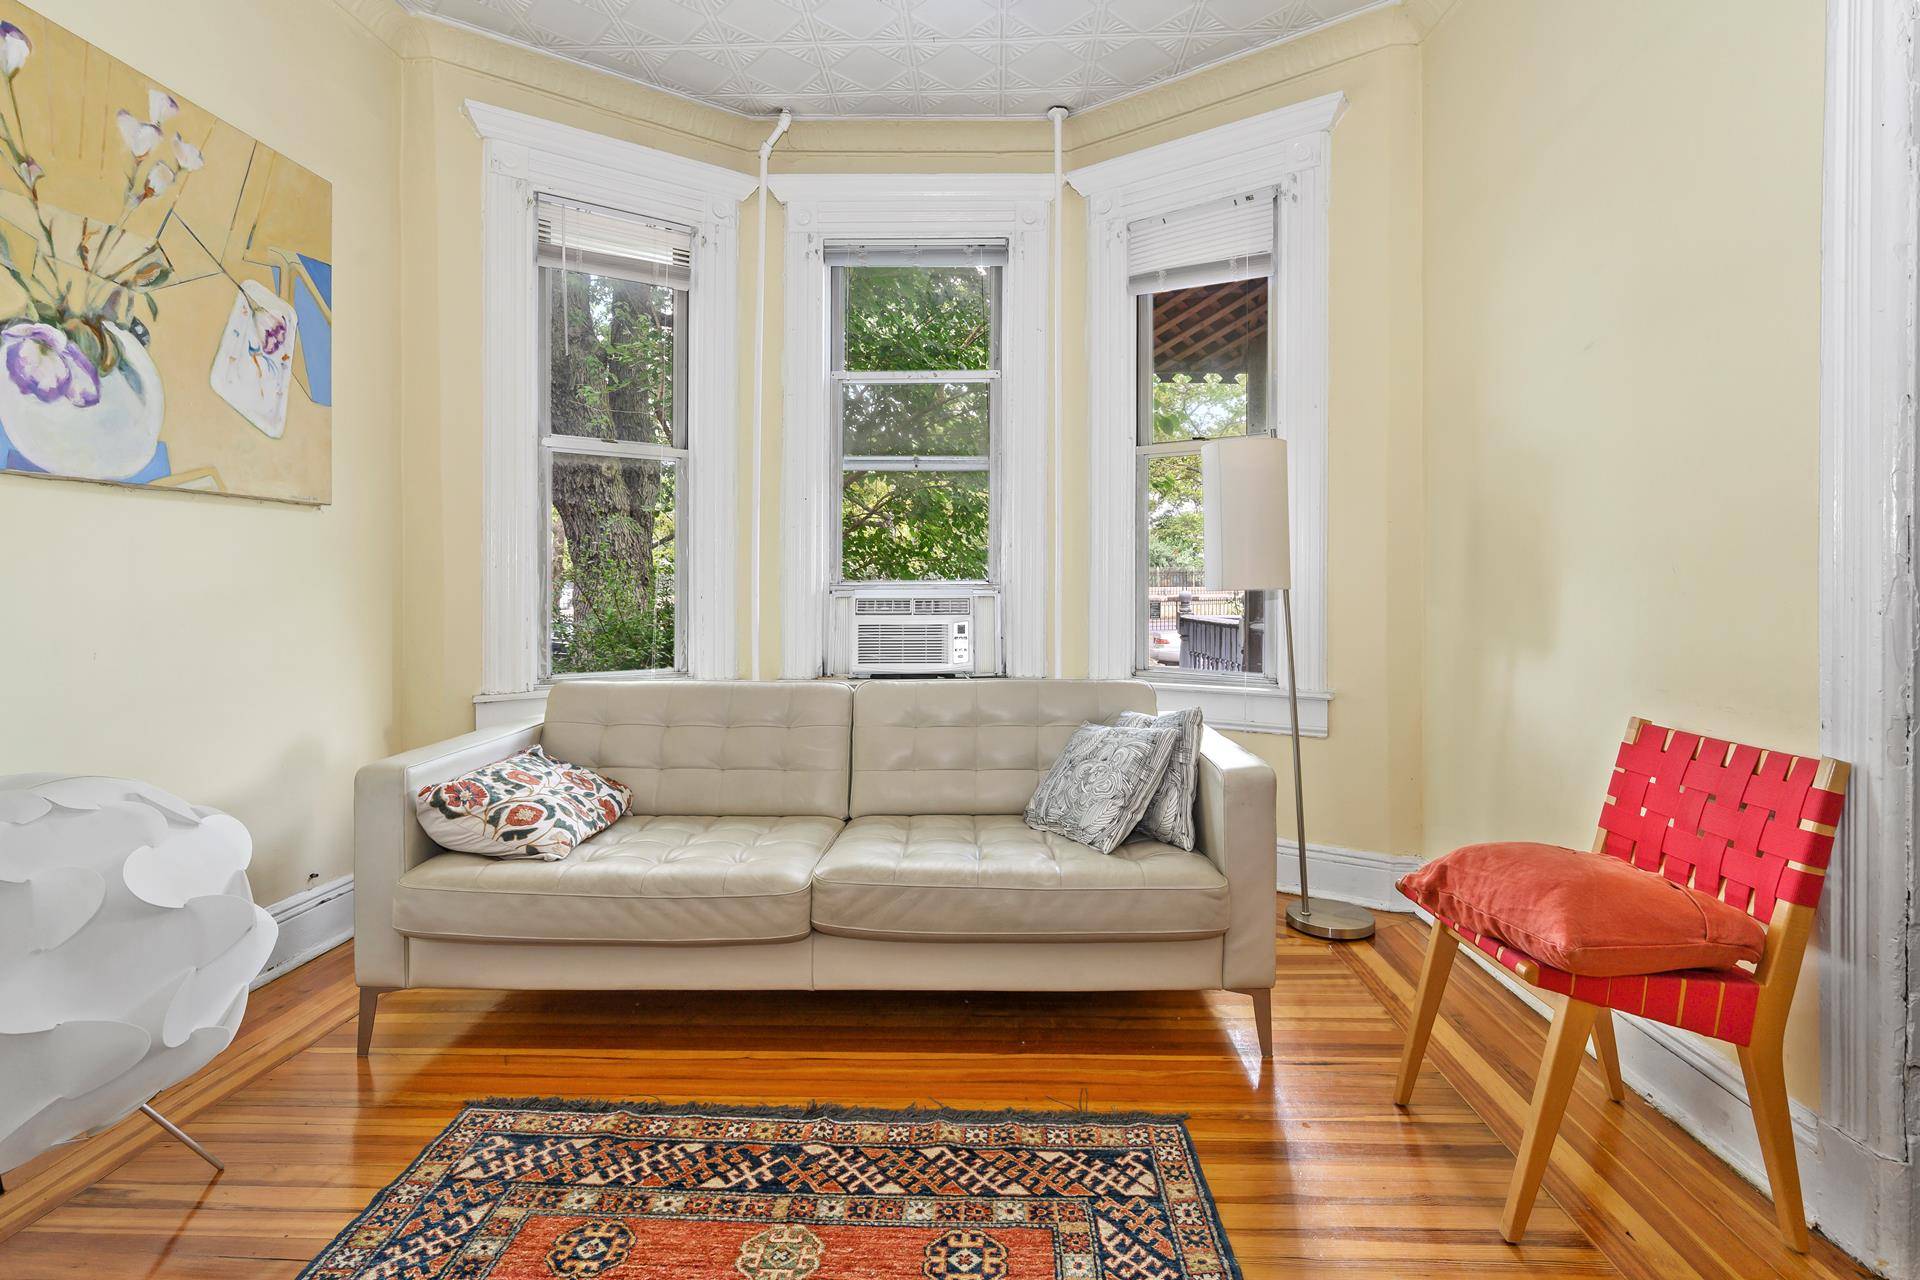 An incredibly deep lot, fantastic pre war details, and beautiful beamed ceilings define this prime Windsor Terrace single family home.